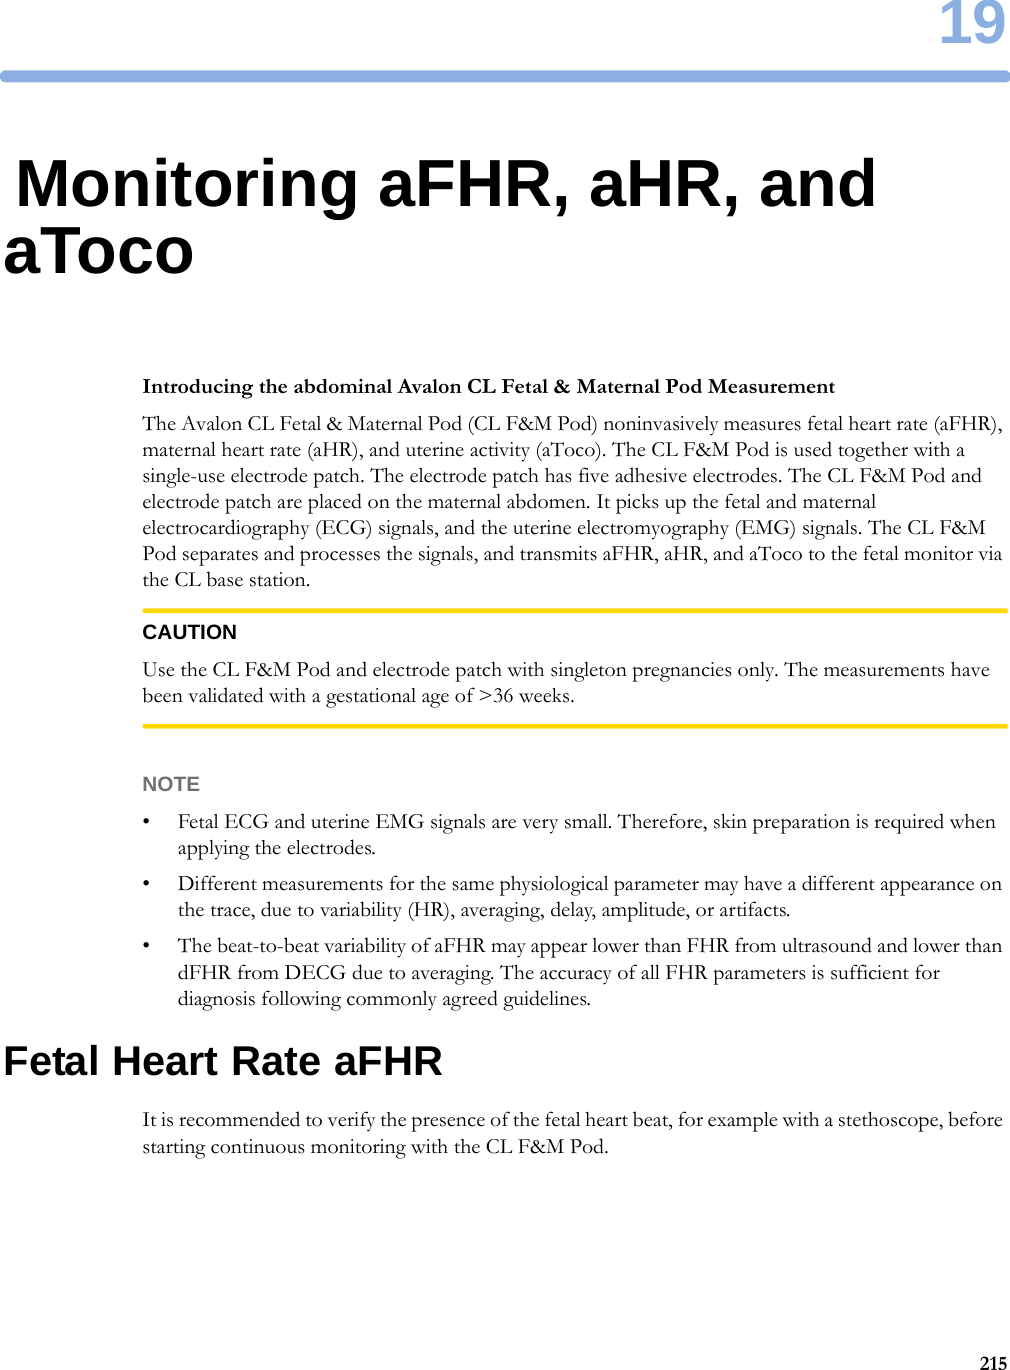 1921519Monitoring aFHR, aHR, and aTocoIntroducing the abdominal Avalon CL Fetal &amp; Maternal Pod MeasurementThe Avalon CL Fetal &amp; Maternal Pod (CL F&amp;M Pod) noninvasively measures fetal heart rate (aFHR), maternal heart rate (aHR), and uterine activity (aToco). The CL F&amp;M Pod is used together with a single-use electrode patch. The electrode patch has five adhesive electrodes. The CL F&amp;M Pod and electrode patch are placed on the maternal abdomen. It picks up the fetal and maternal electrocardiography (ECG) signals, and the uterine electromyography (EMG) signals. The CL F&amp;M Pod separates and processes the signals, and transmits aFHR, aHR, and aToco to the fetal monitor via the CL base station.CAUTIONUse the CL F&amp;M Pod and electrode patch with singleton pregnancies only. The measurements have been validated with a gestational age of &gt;36 weeks.NOTE• Fetal ECG and uterine EMG signals are very small. Therefore, skin preparation is required when applying the electrodes.• Different measurements for the same physiological parameter may have a different appearance on the trace, due to variability (HR), averaging, delay, amplitude, or artifacts.• The beat-to-beat variability of aFHR may appear lower than FHR from ultrasound and lower than dFHR from DECG due to averaging. The accuracy of all FHR parameters is sufficient for diagnosis following commonly agreed guidelines.Fetal Heart Rate aFHRIt is recommended to verify the presence of the fetal heart beat, for example with a stethoscope, before starting continuous monitoring with the CL F&amp;M Pod.